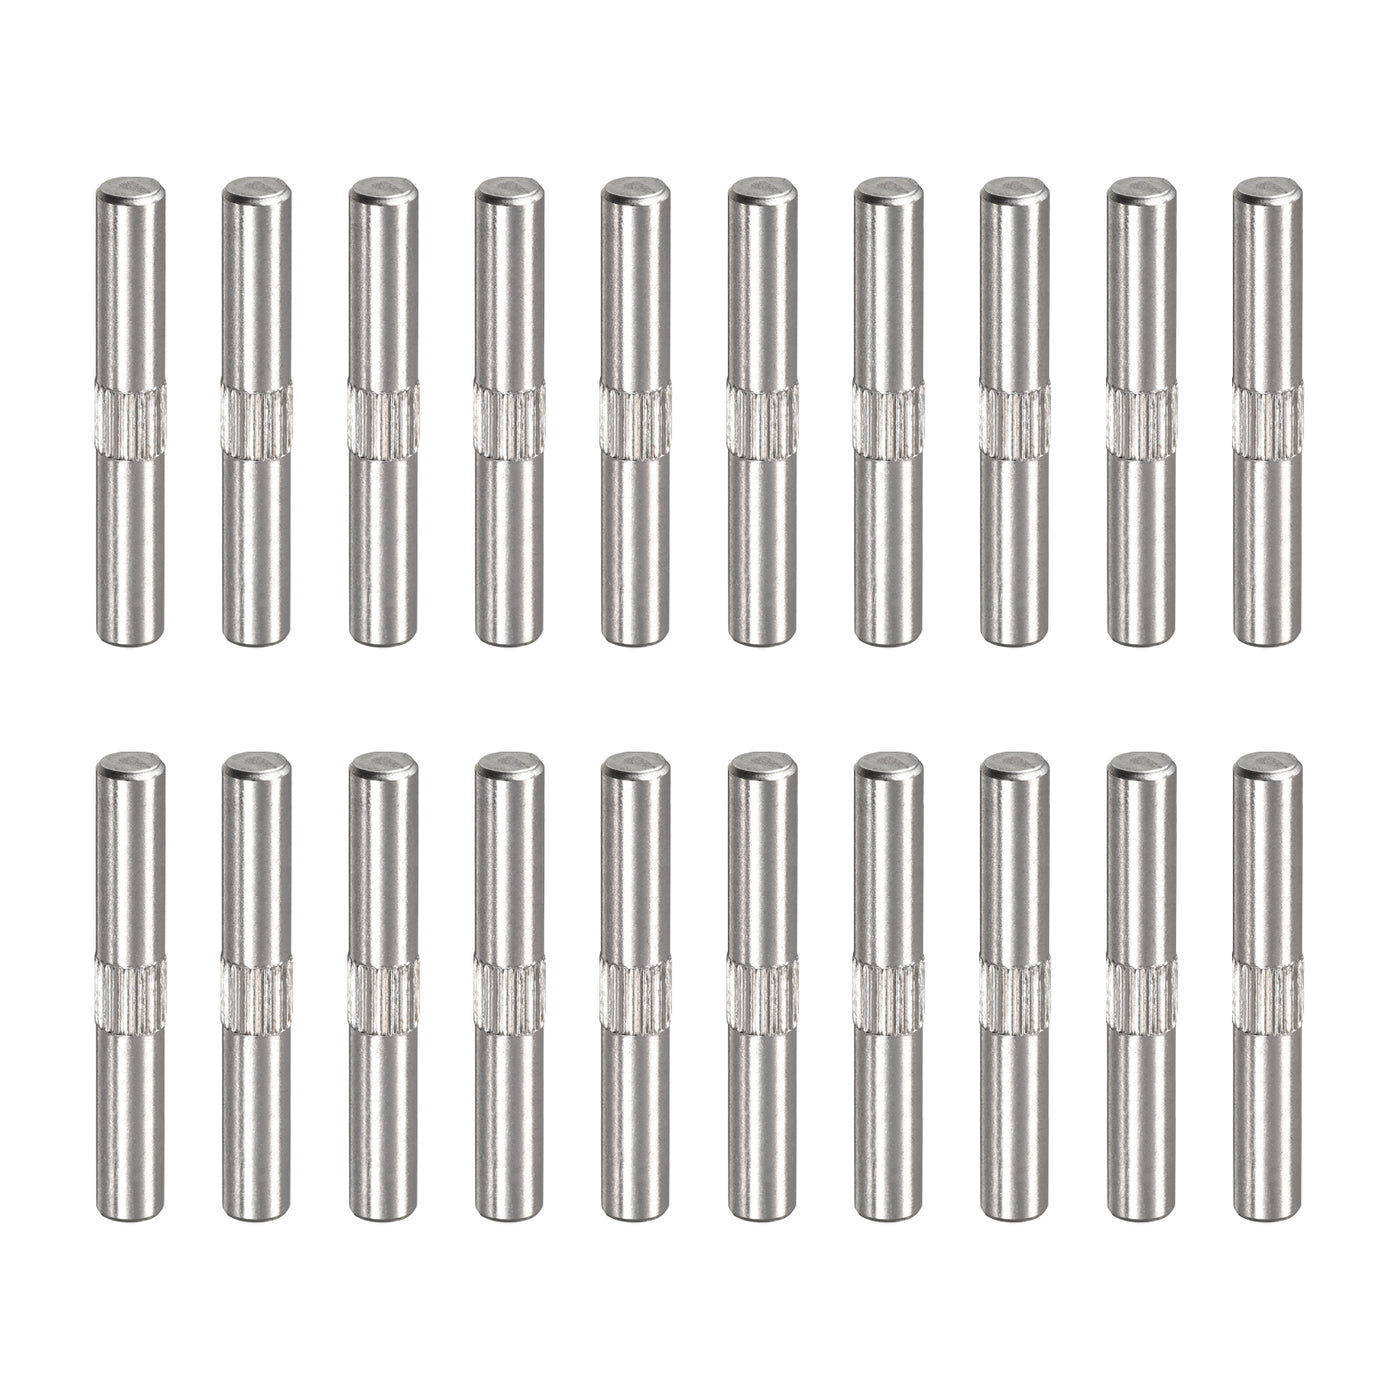 uxcell Uxcell 5x35mm 304 Stainless Steel Dowel Pins, 20Pcs Center Knurled Chamfered End Pin